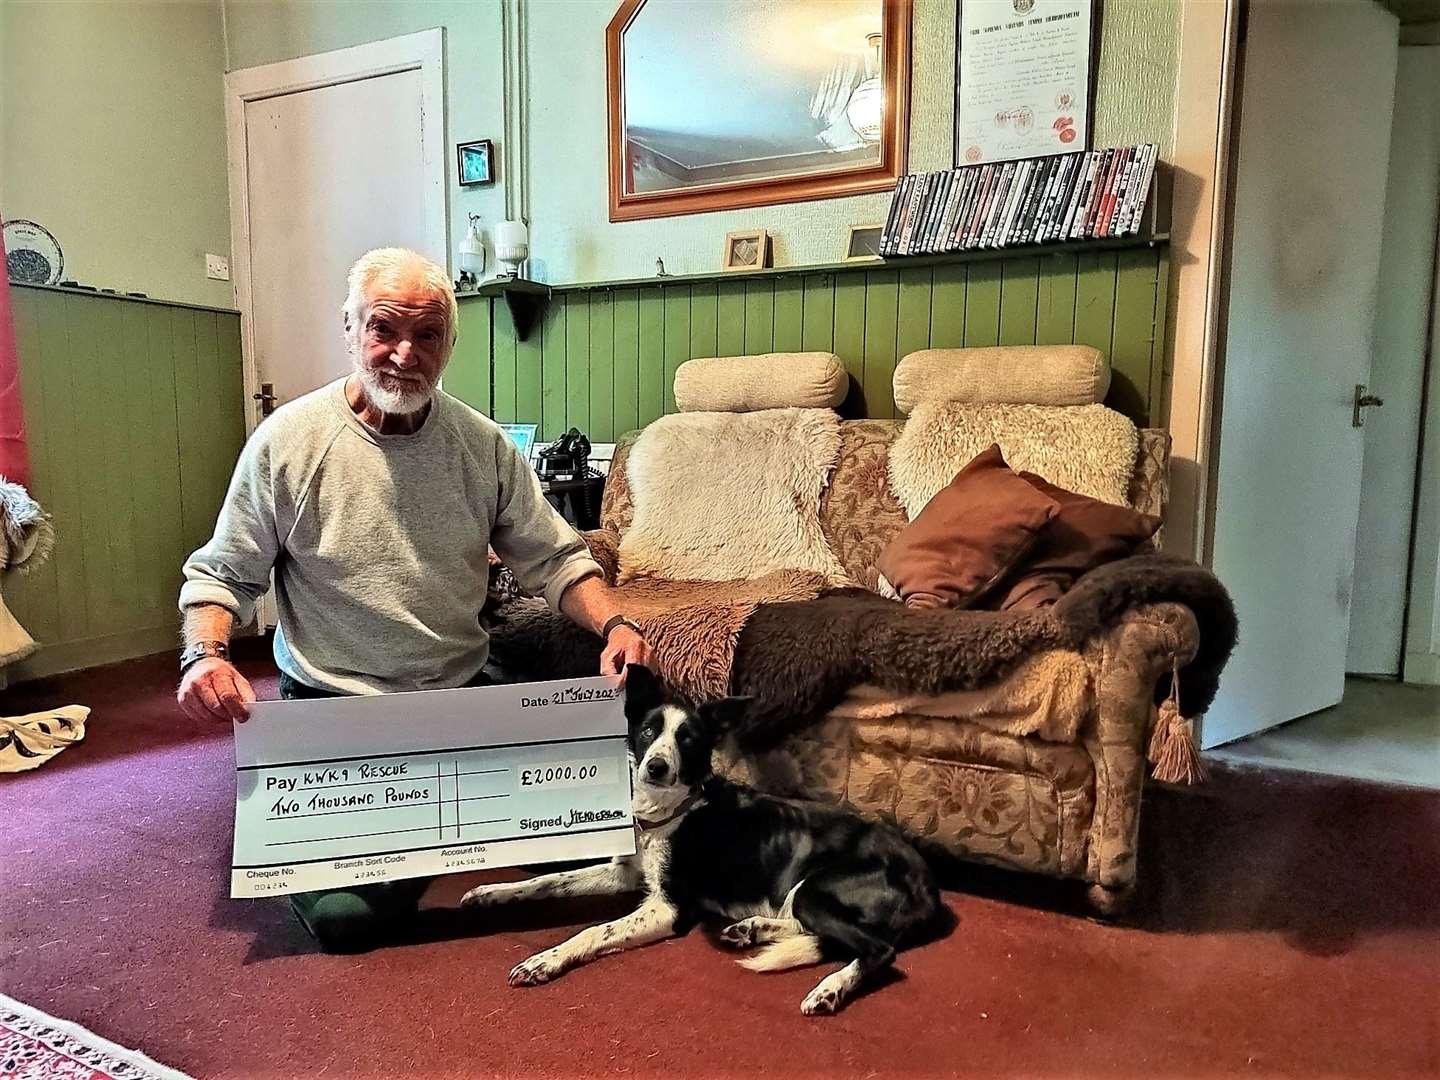 Jim Hamilton from Portgower presented a £2000 cheque to Wick-based dog rescue charity KWK9. Jim is pictured with collie dog Daisy that he got from the charity.